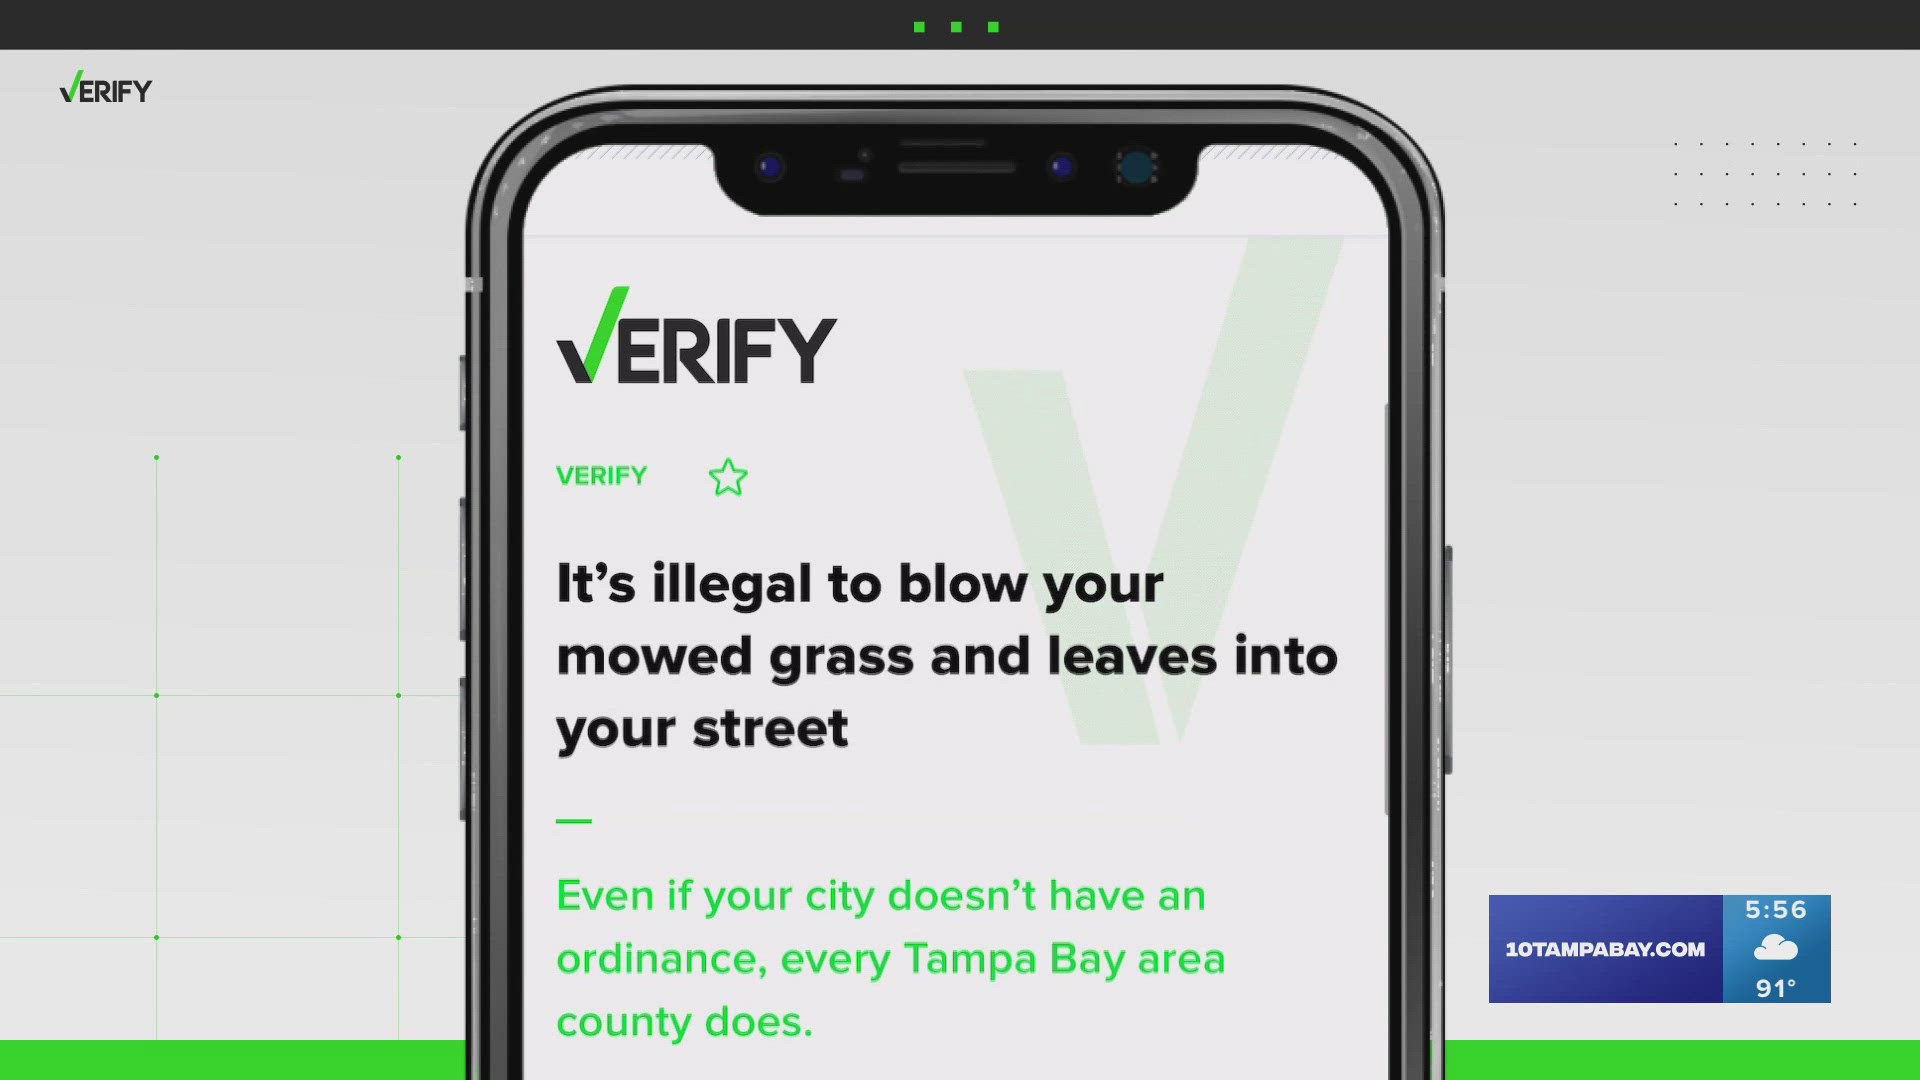 Even if your city doesn’t have an ordinance, every Tampa Bay area county does.